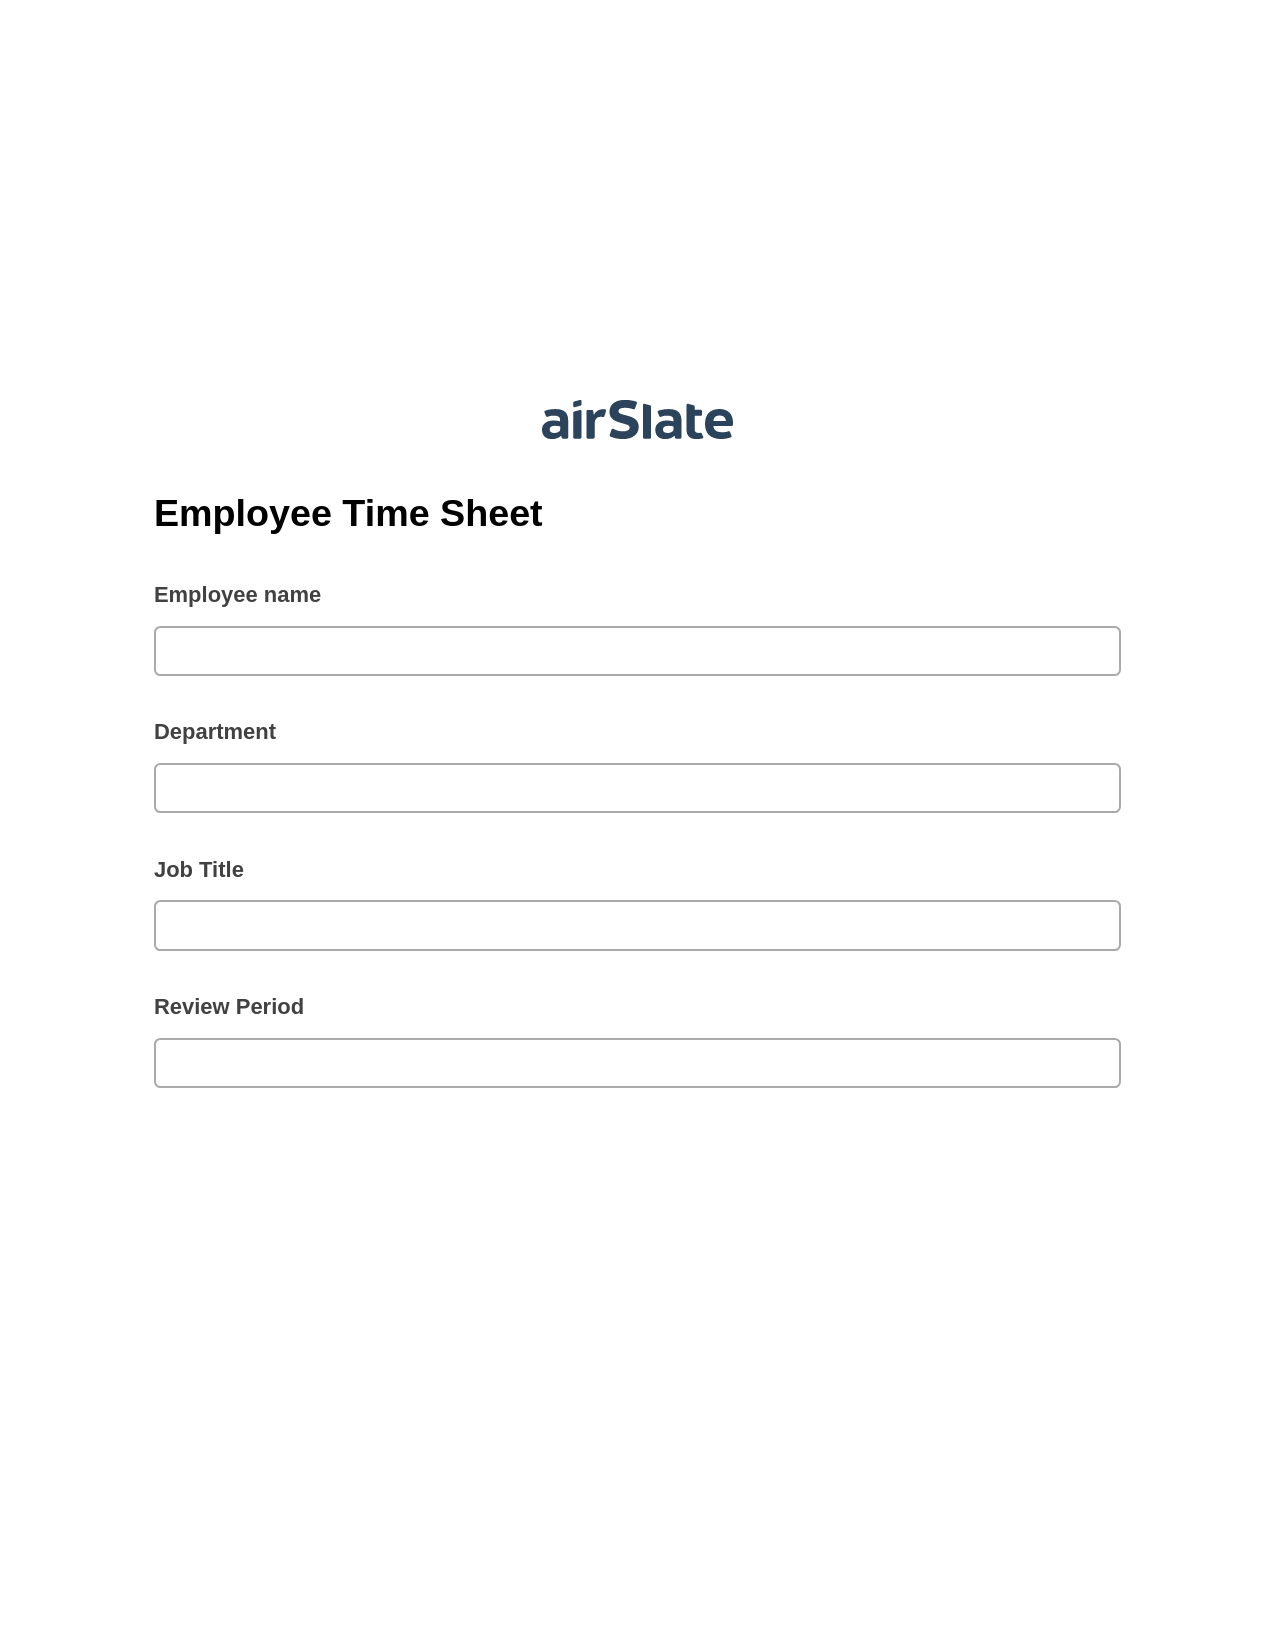 Multirole Employee Time Sheet Pre-fill from MS Dynamics 365 Records, Create Salesforce Records Bot, Archive to Google Drive Bot